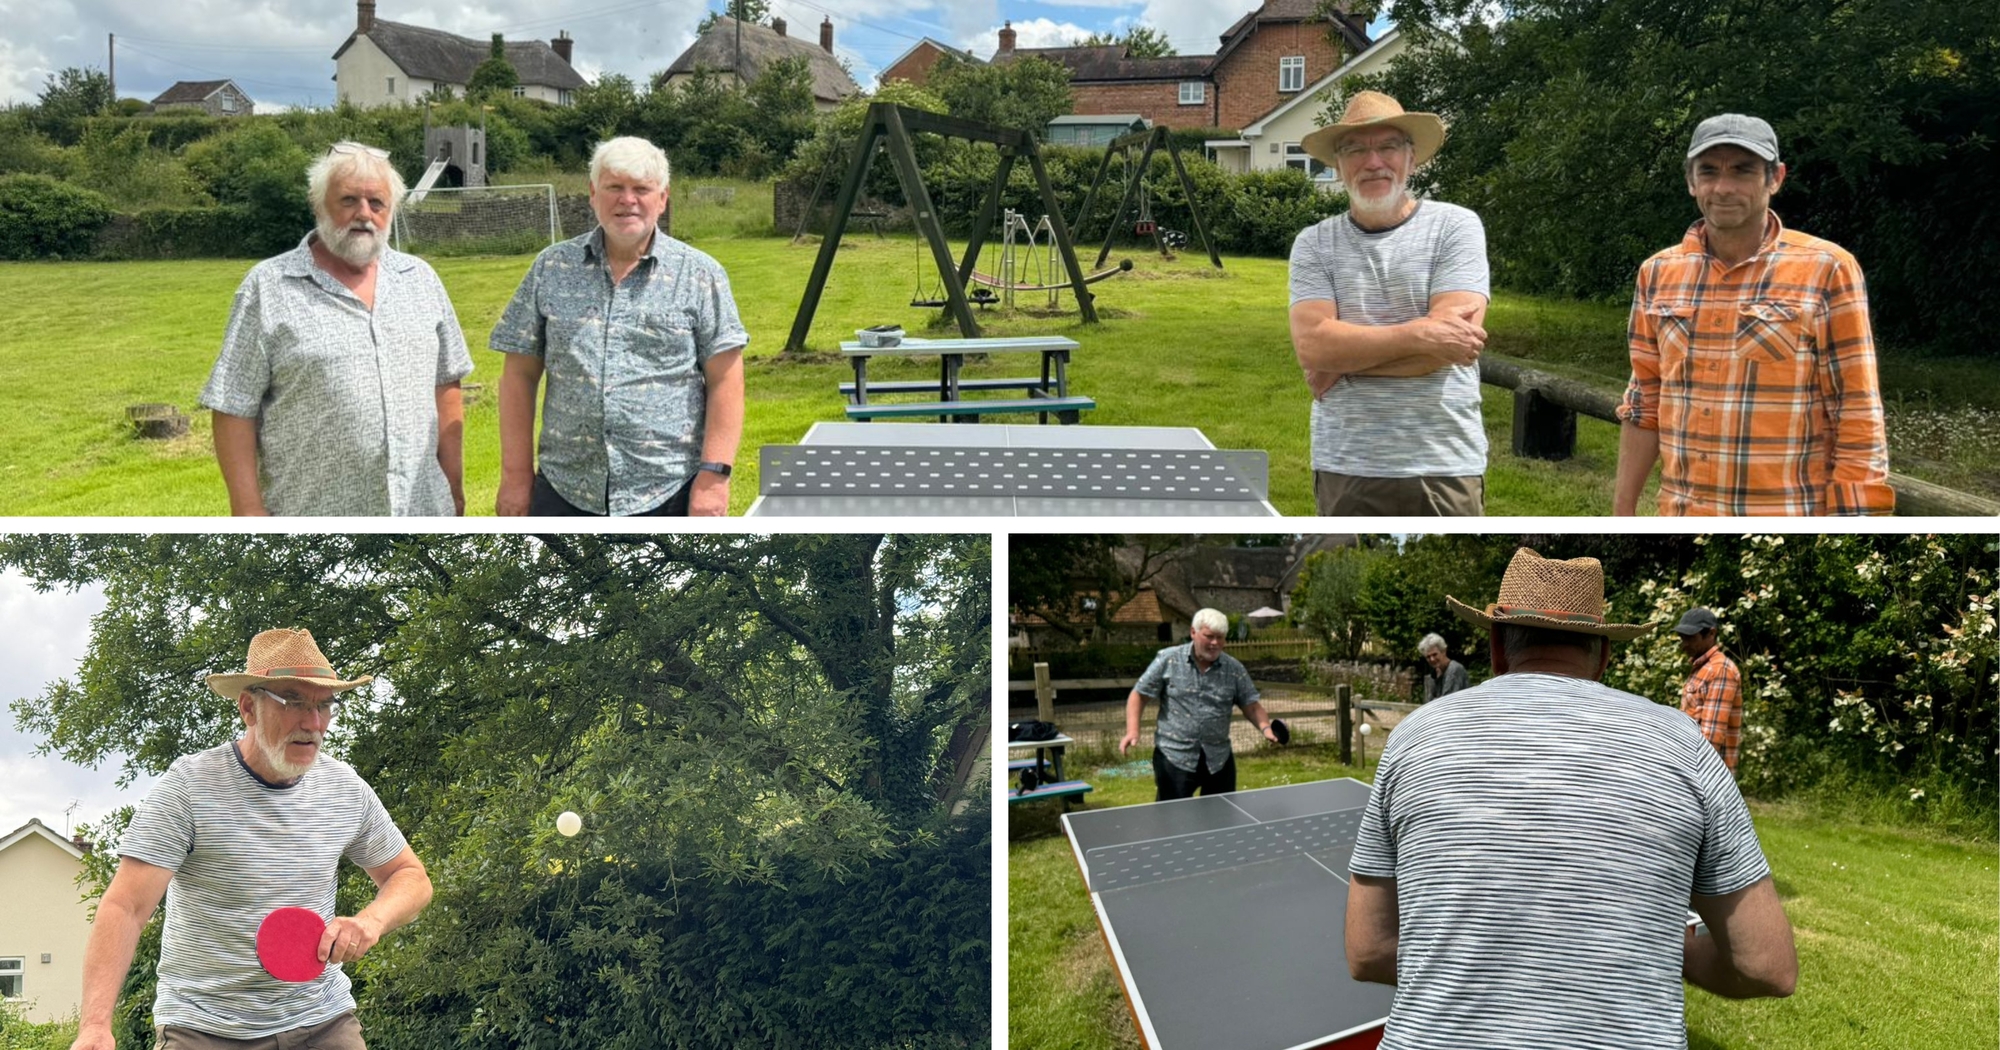 Collage of photos of the Gittisham ping pong table in action. L-R Bill Griffiths, Nick Chapman, Alasdair Bruce and Hamish Hall